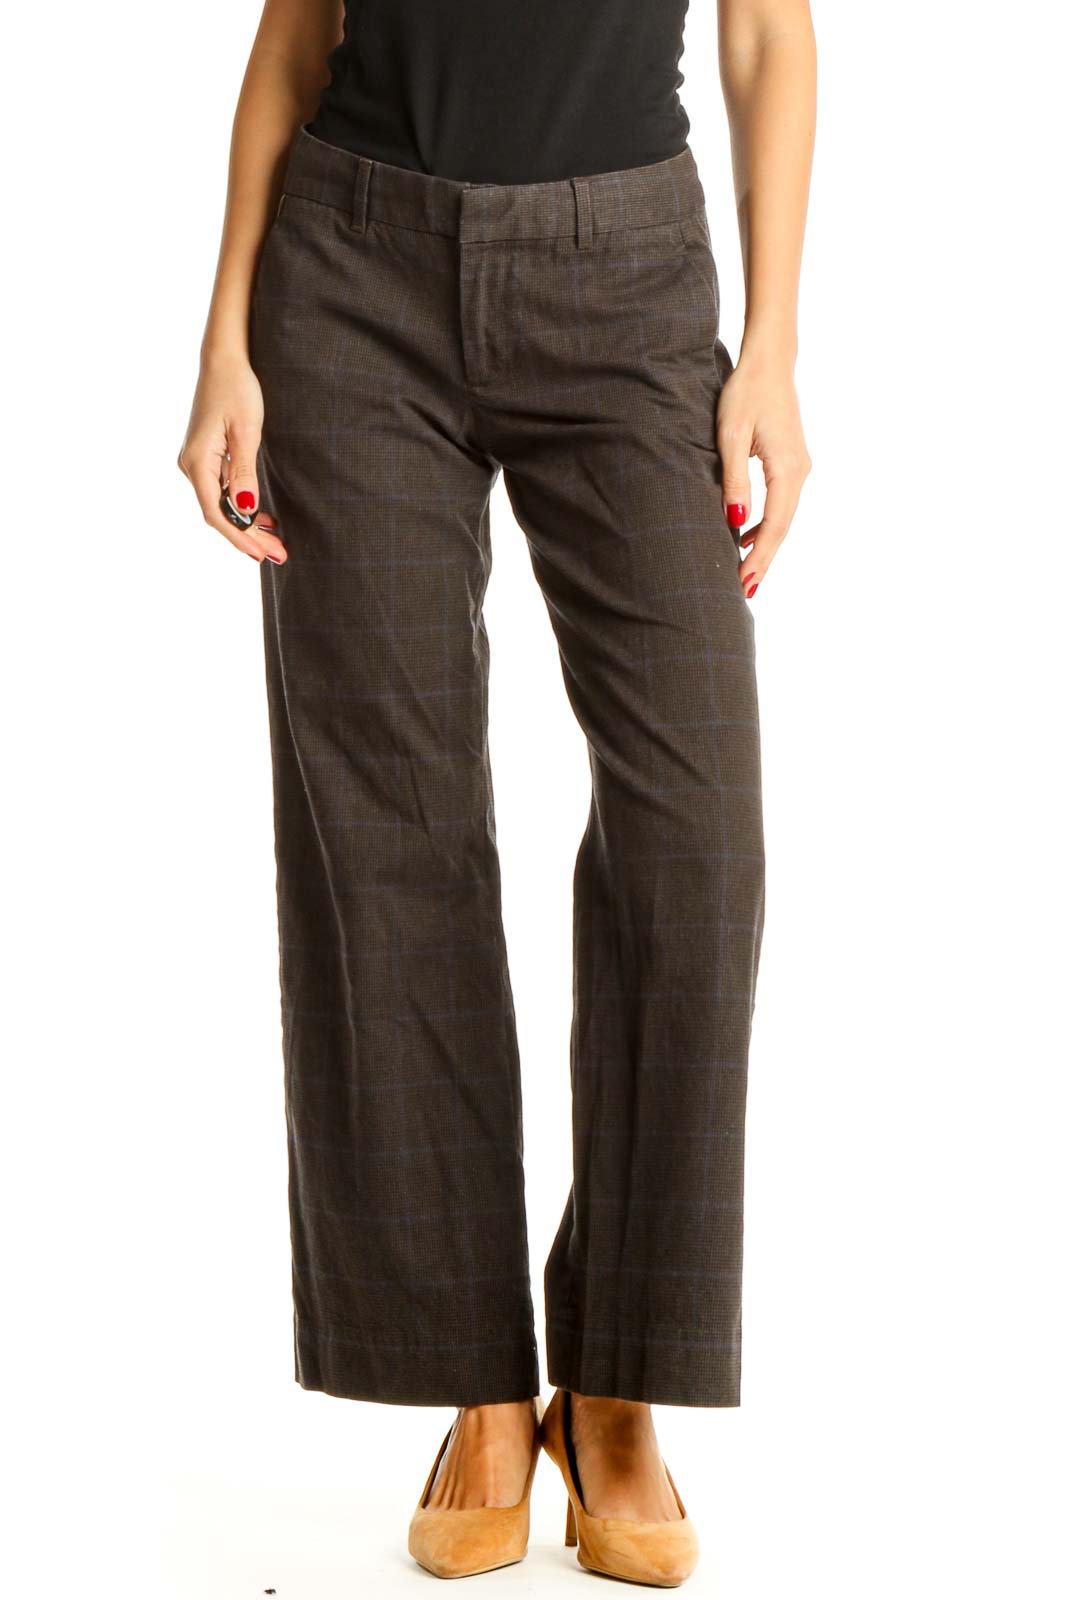 Gap - Black Solid Casual Trousers Cotton Spandex | SilkRoll